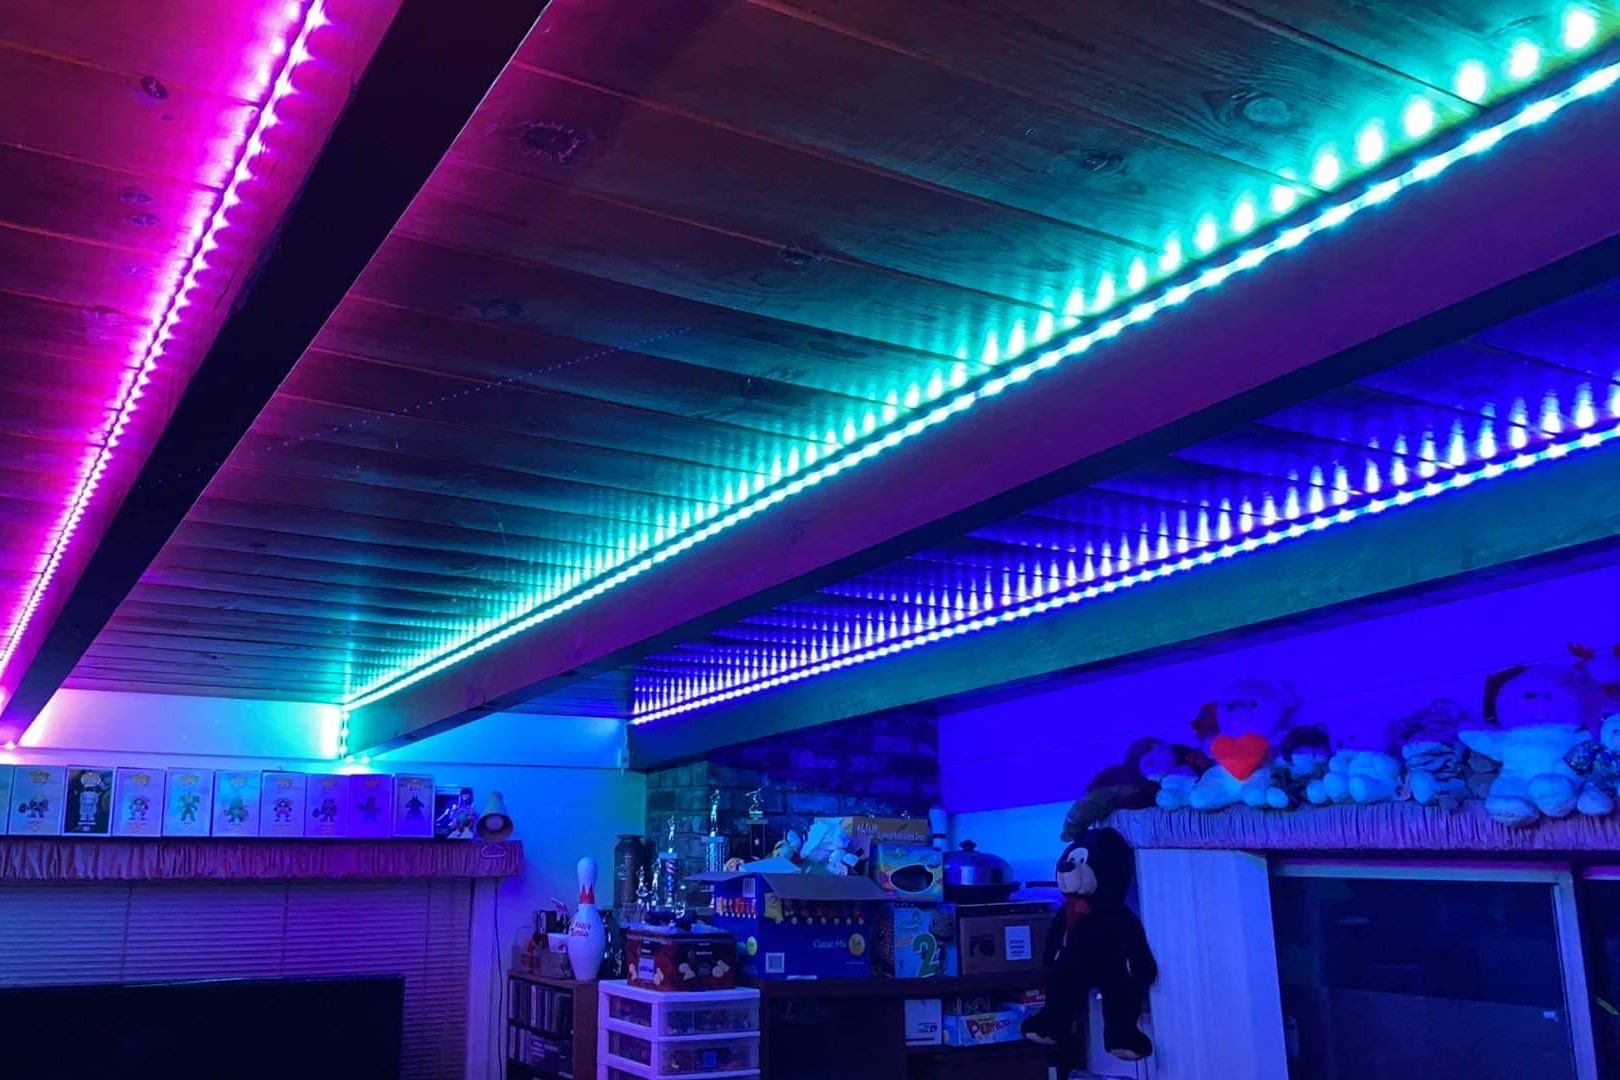 How Many Philips Hue Light Strip Extensions Can I Add?